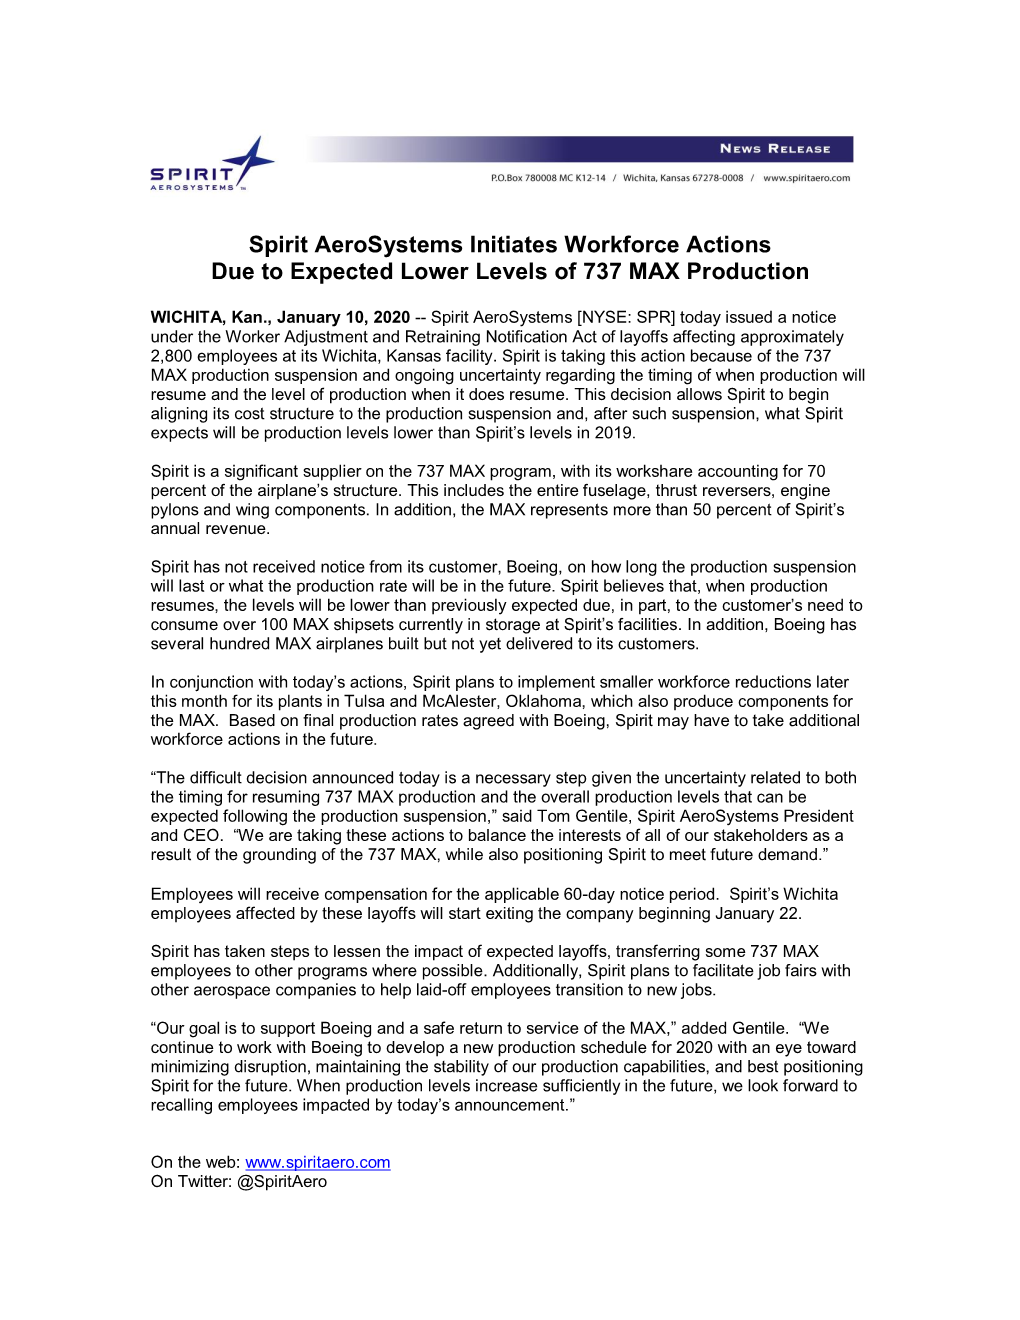 Spirit Aerosystems Initiates Workforce Actions Due to Expected Lower Levels of 737 MAX Production